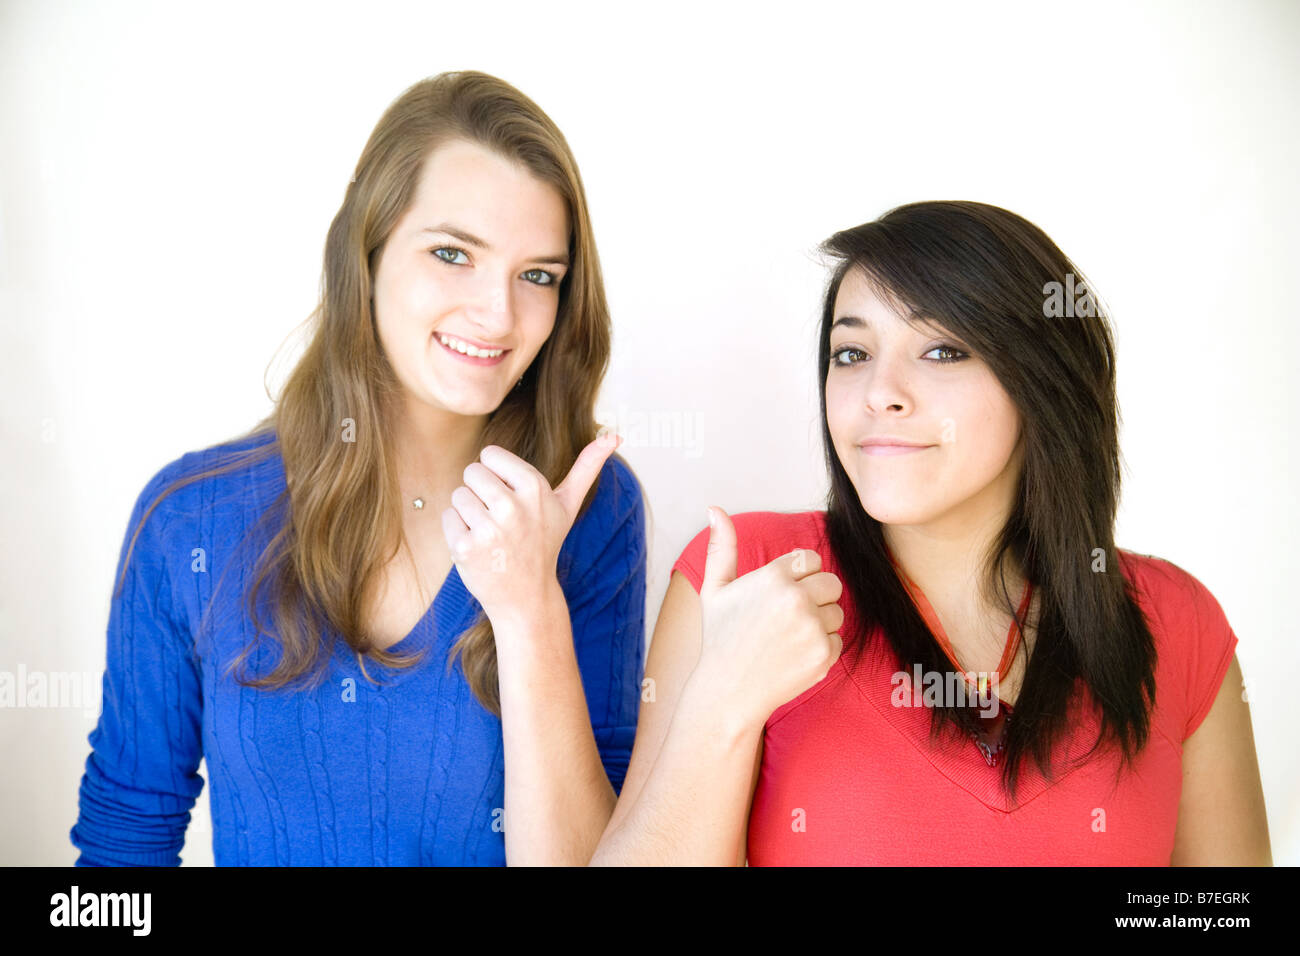 Two teenage girls standing side by side giving the thumbs up sign Stock Photo